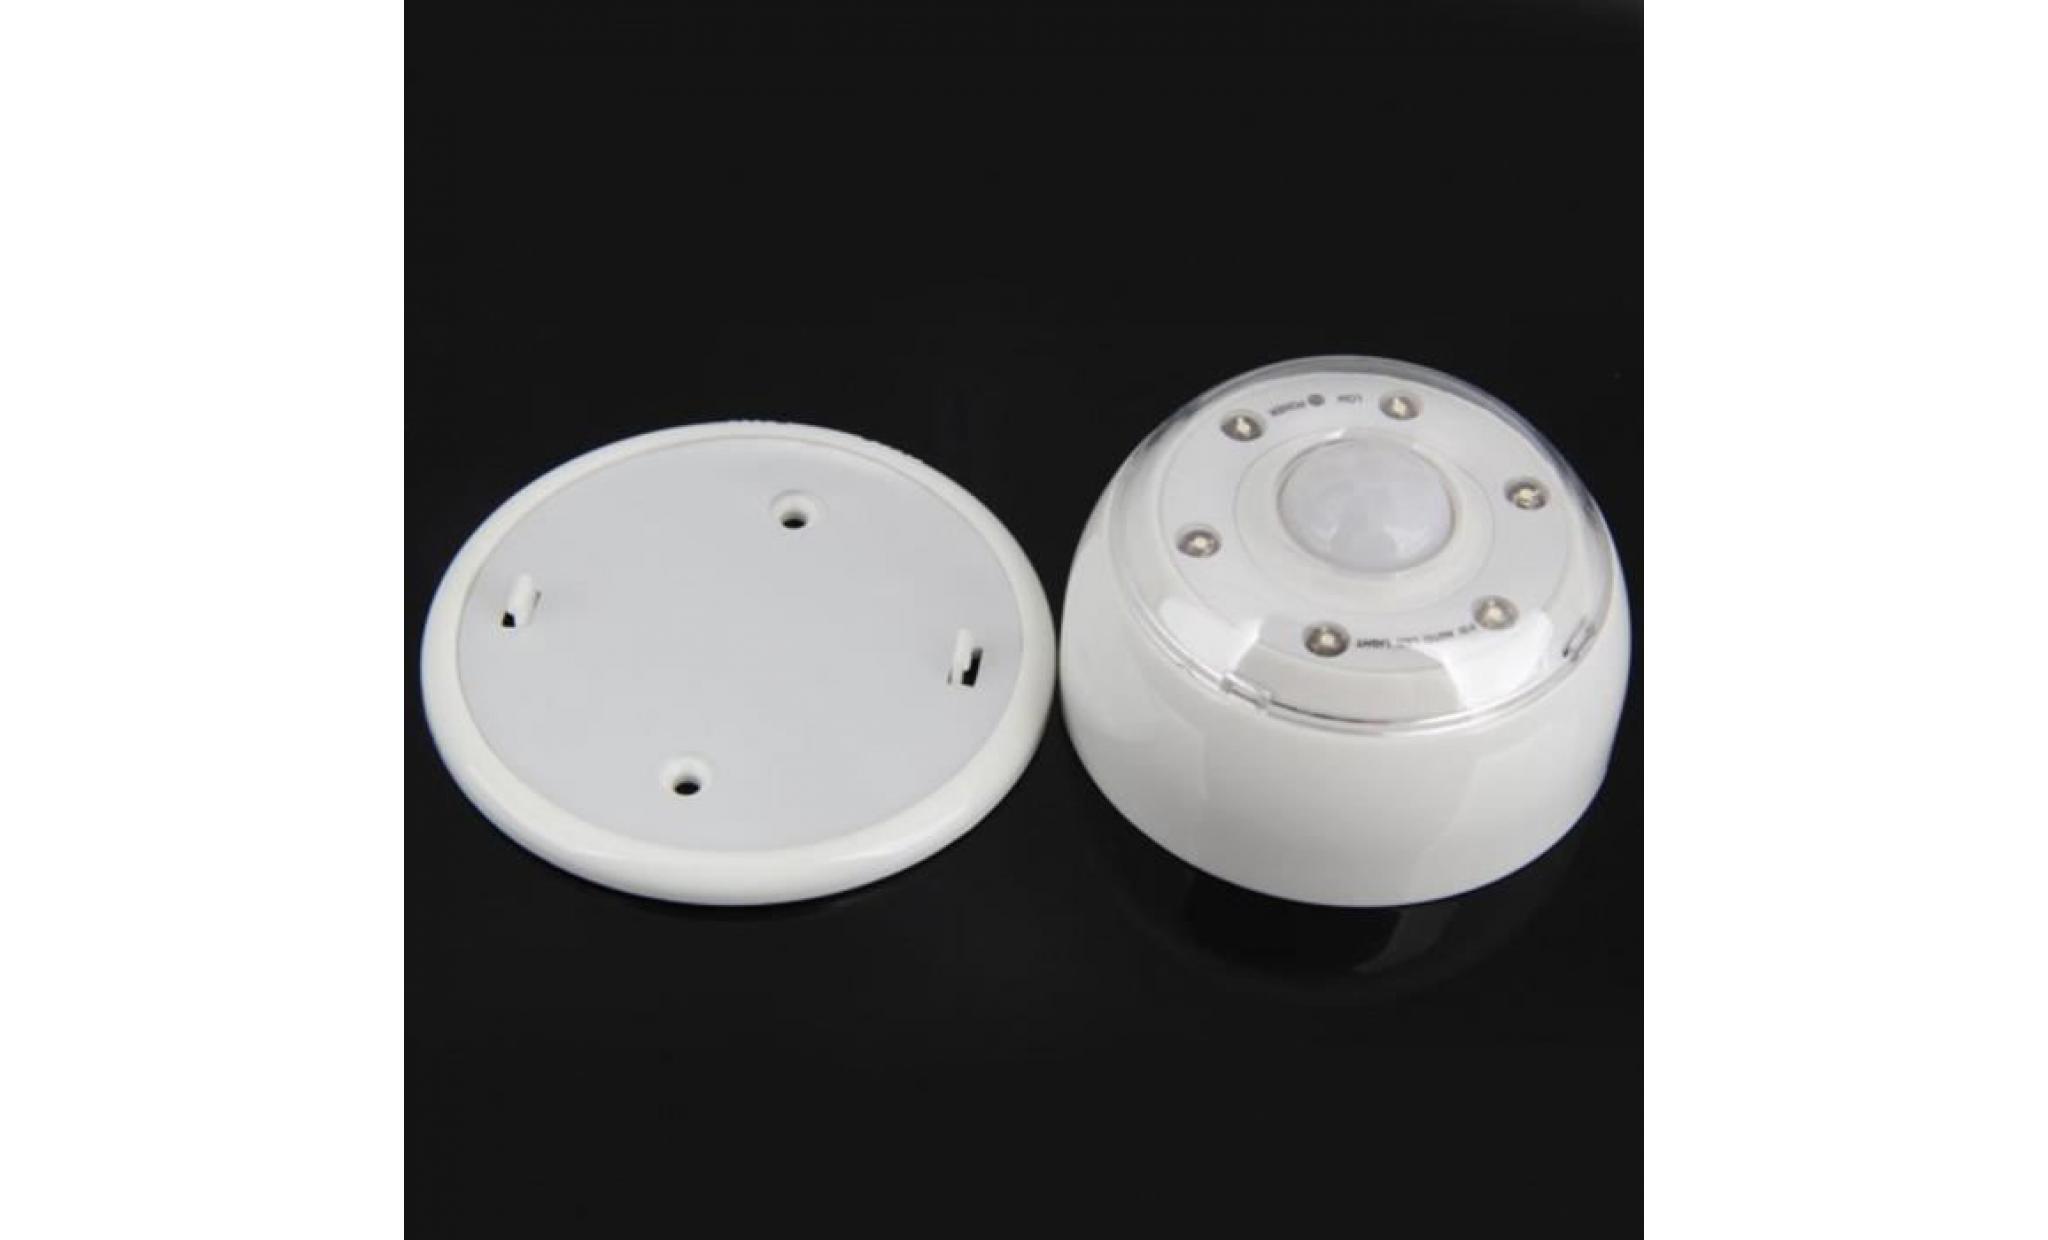 pir auto sensor motion detector lamp 6 leds light wireless infrared home outdoor pageare1051 pageare1051 pas cher